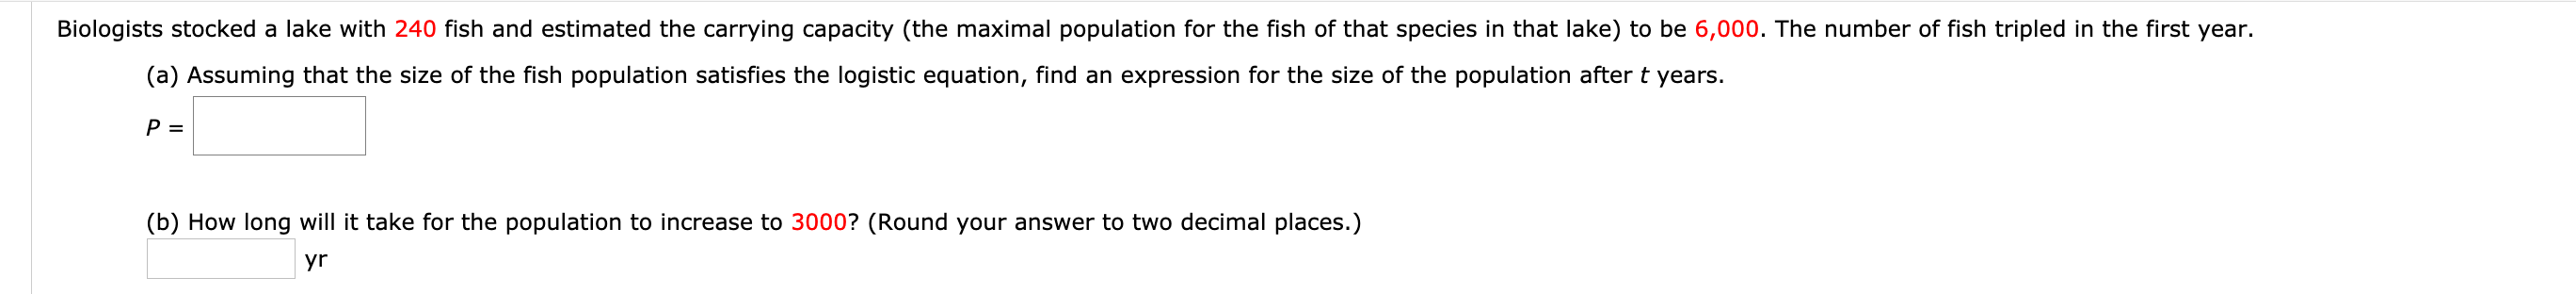 Biologists stocked a lake with 240 fish and estimated the carrying capacity (the maximal population for the fish of that species in that lake) to be 6,000. The number of fish tripled in the first year.
(a) Assuming that the size of the fish population satisfies the logistic equation, find an expression for the size of the population after t years.
P =
(b) How long will it take for the population to increase to 3000? (Round your answer to two decimal places.)
yr
